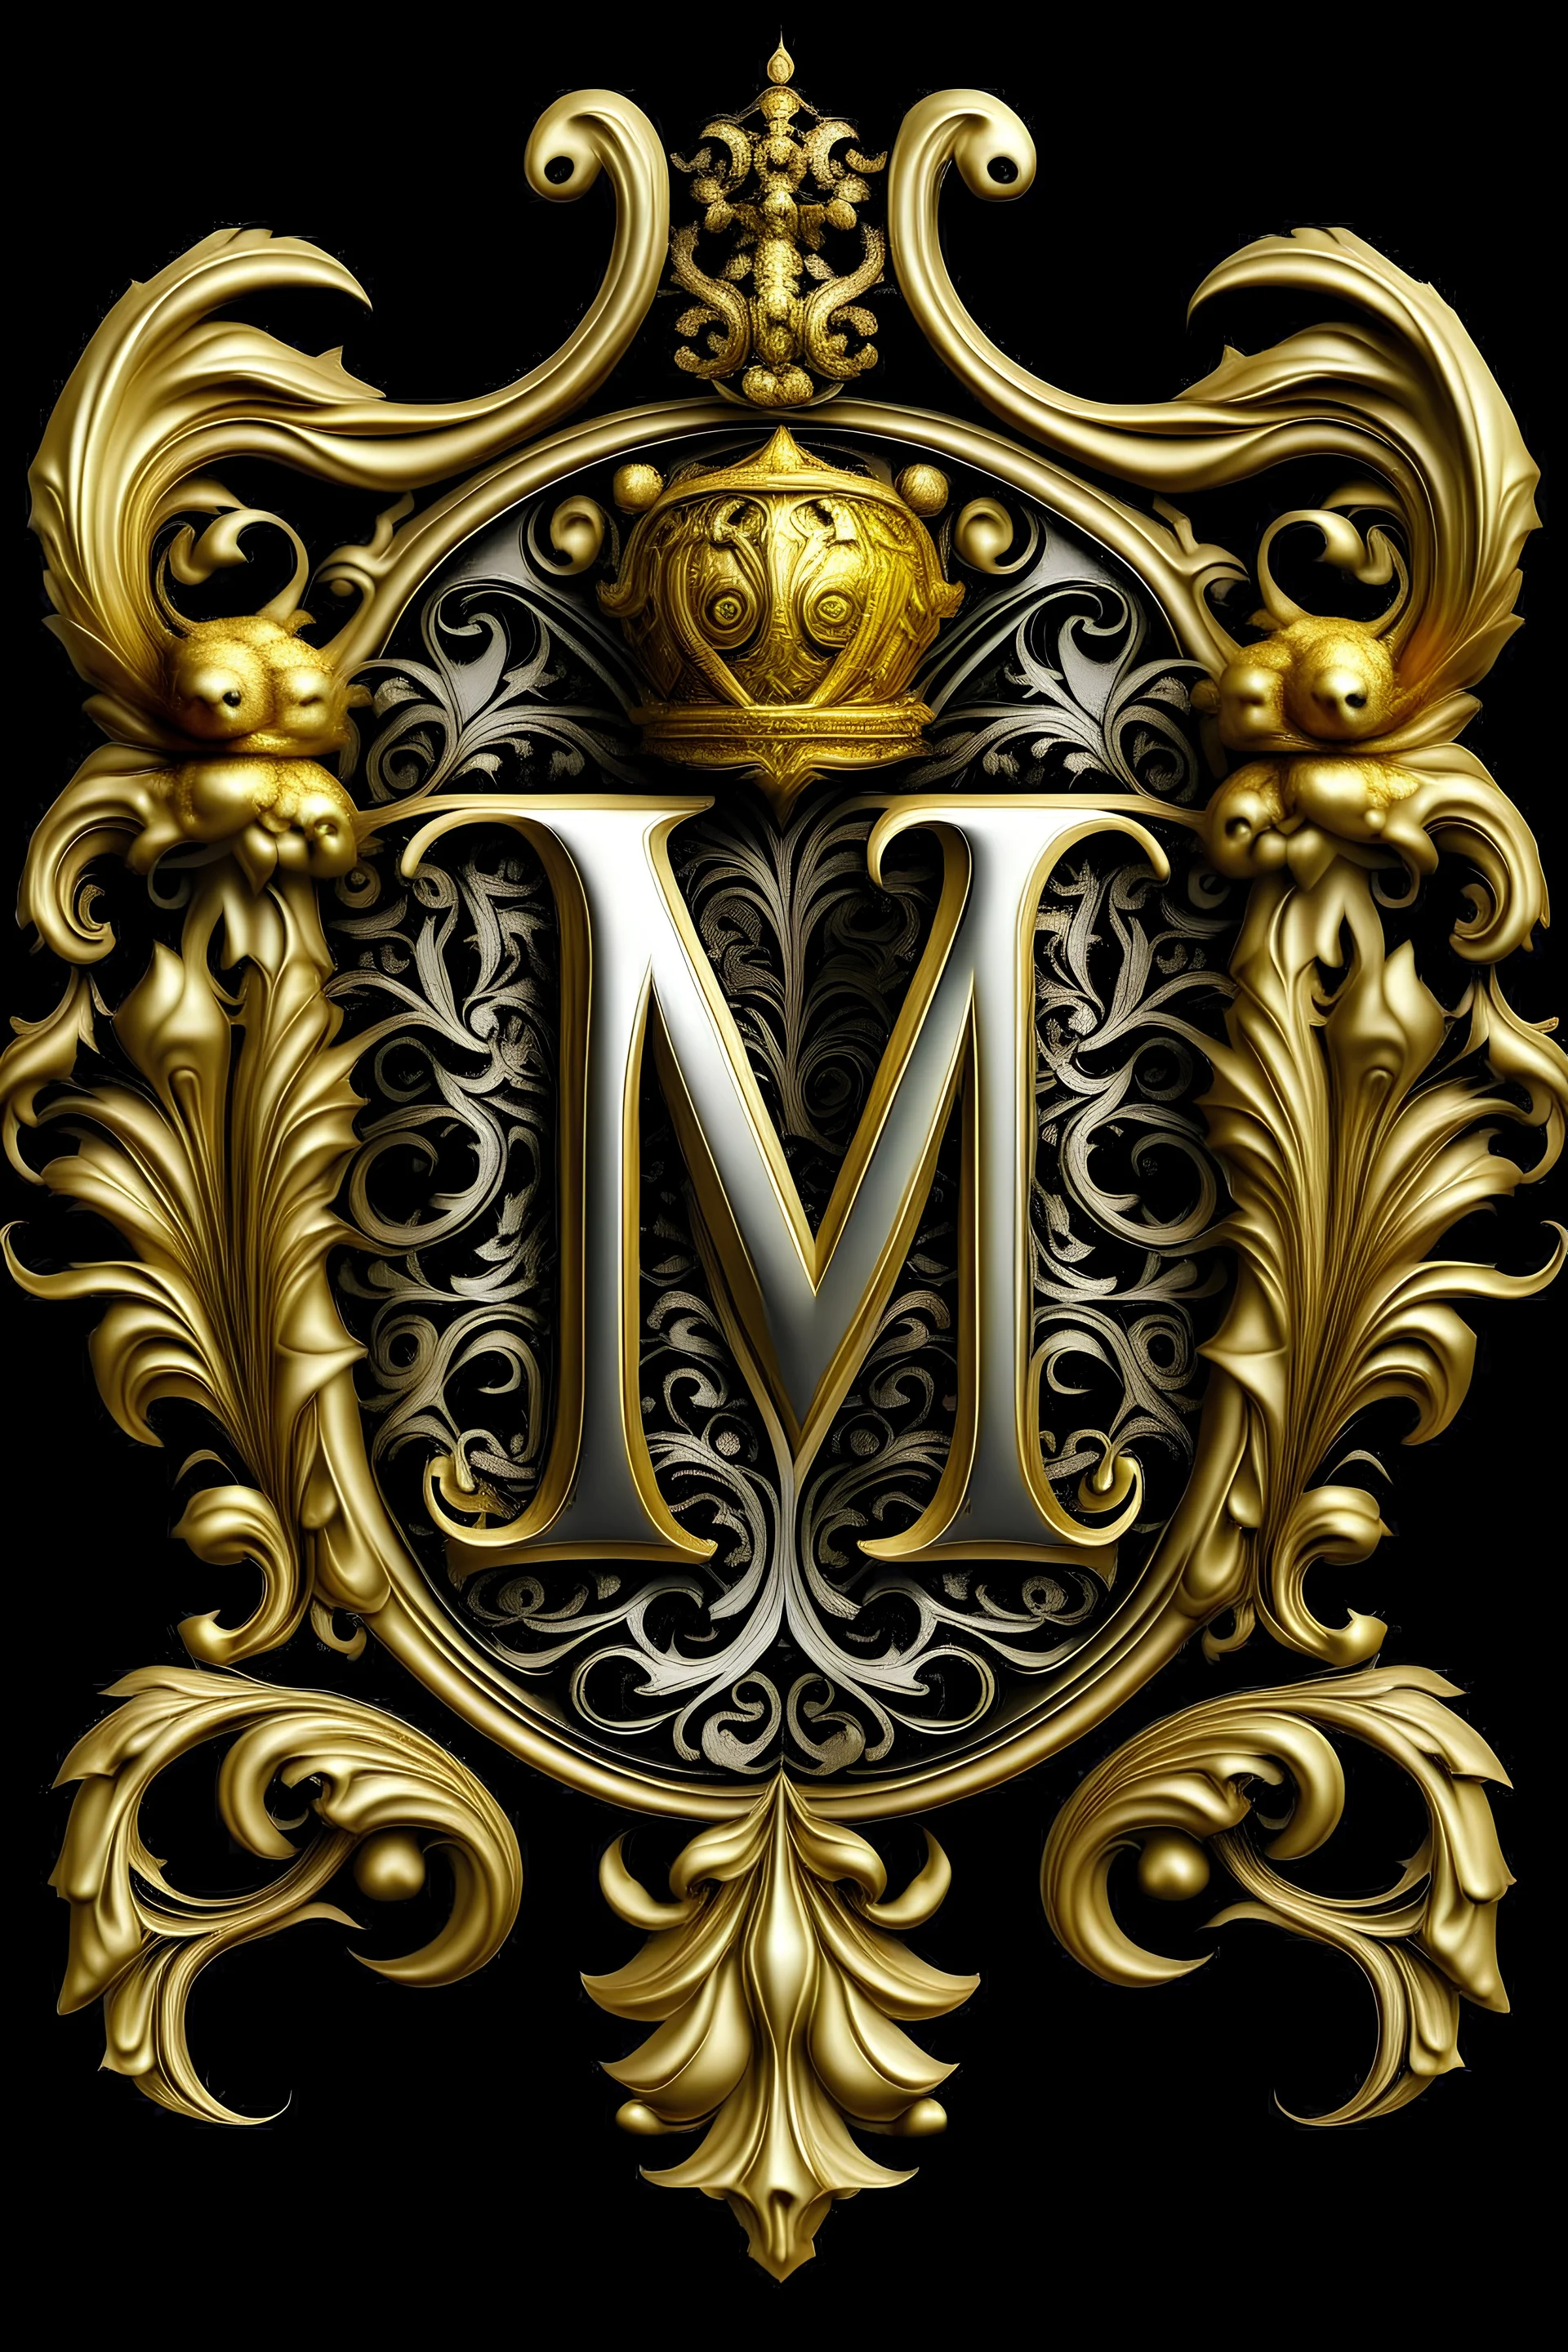 crest, majestic, luxury, wealthy, embroidery, letter "M" and "L", gold, silver